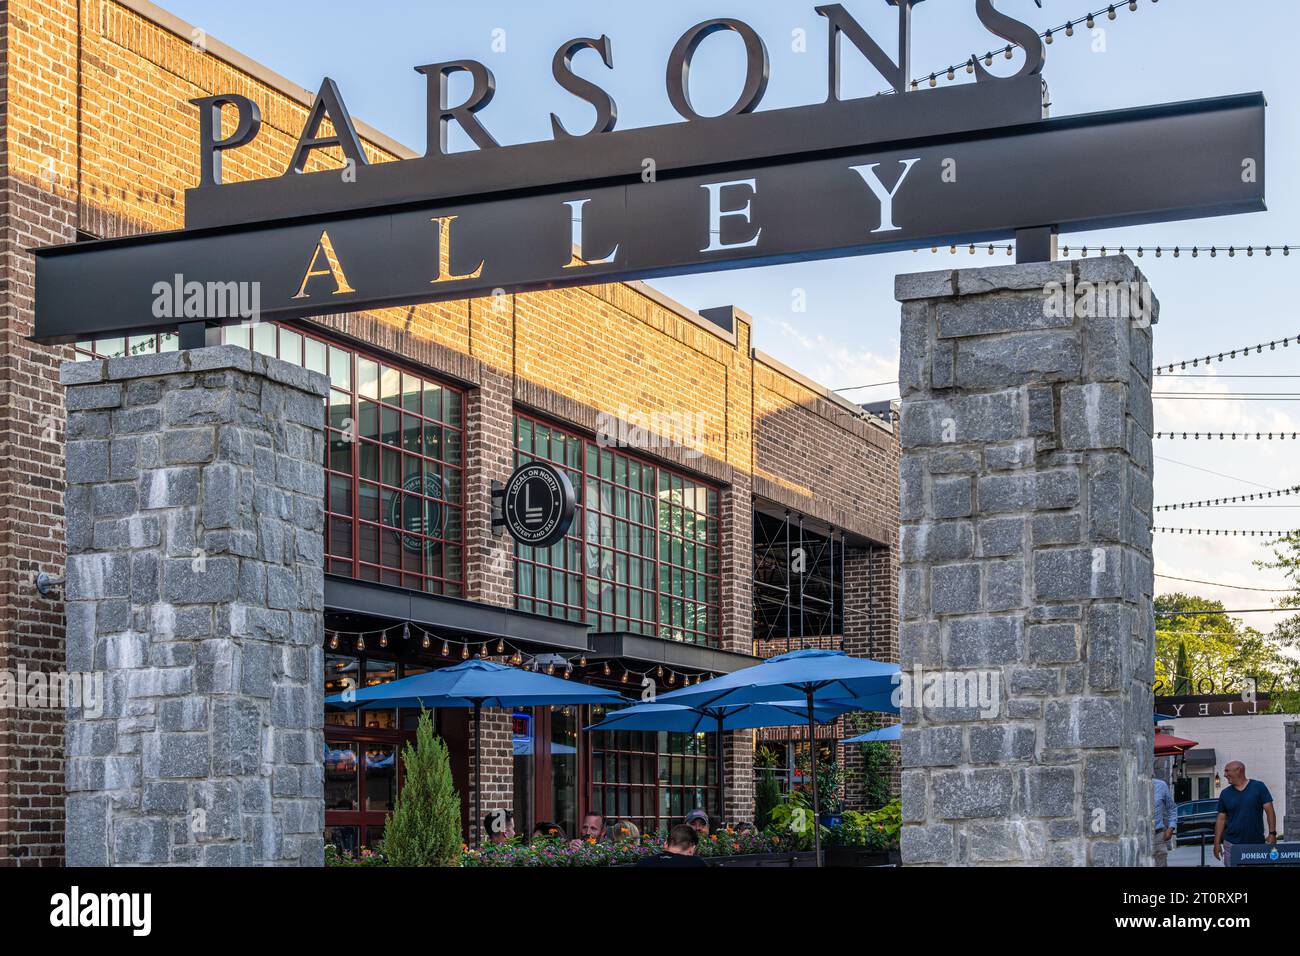 Parson's Alley in downtown Duluth, Georgia. (USA) Stock Photo